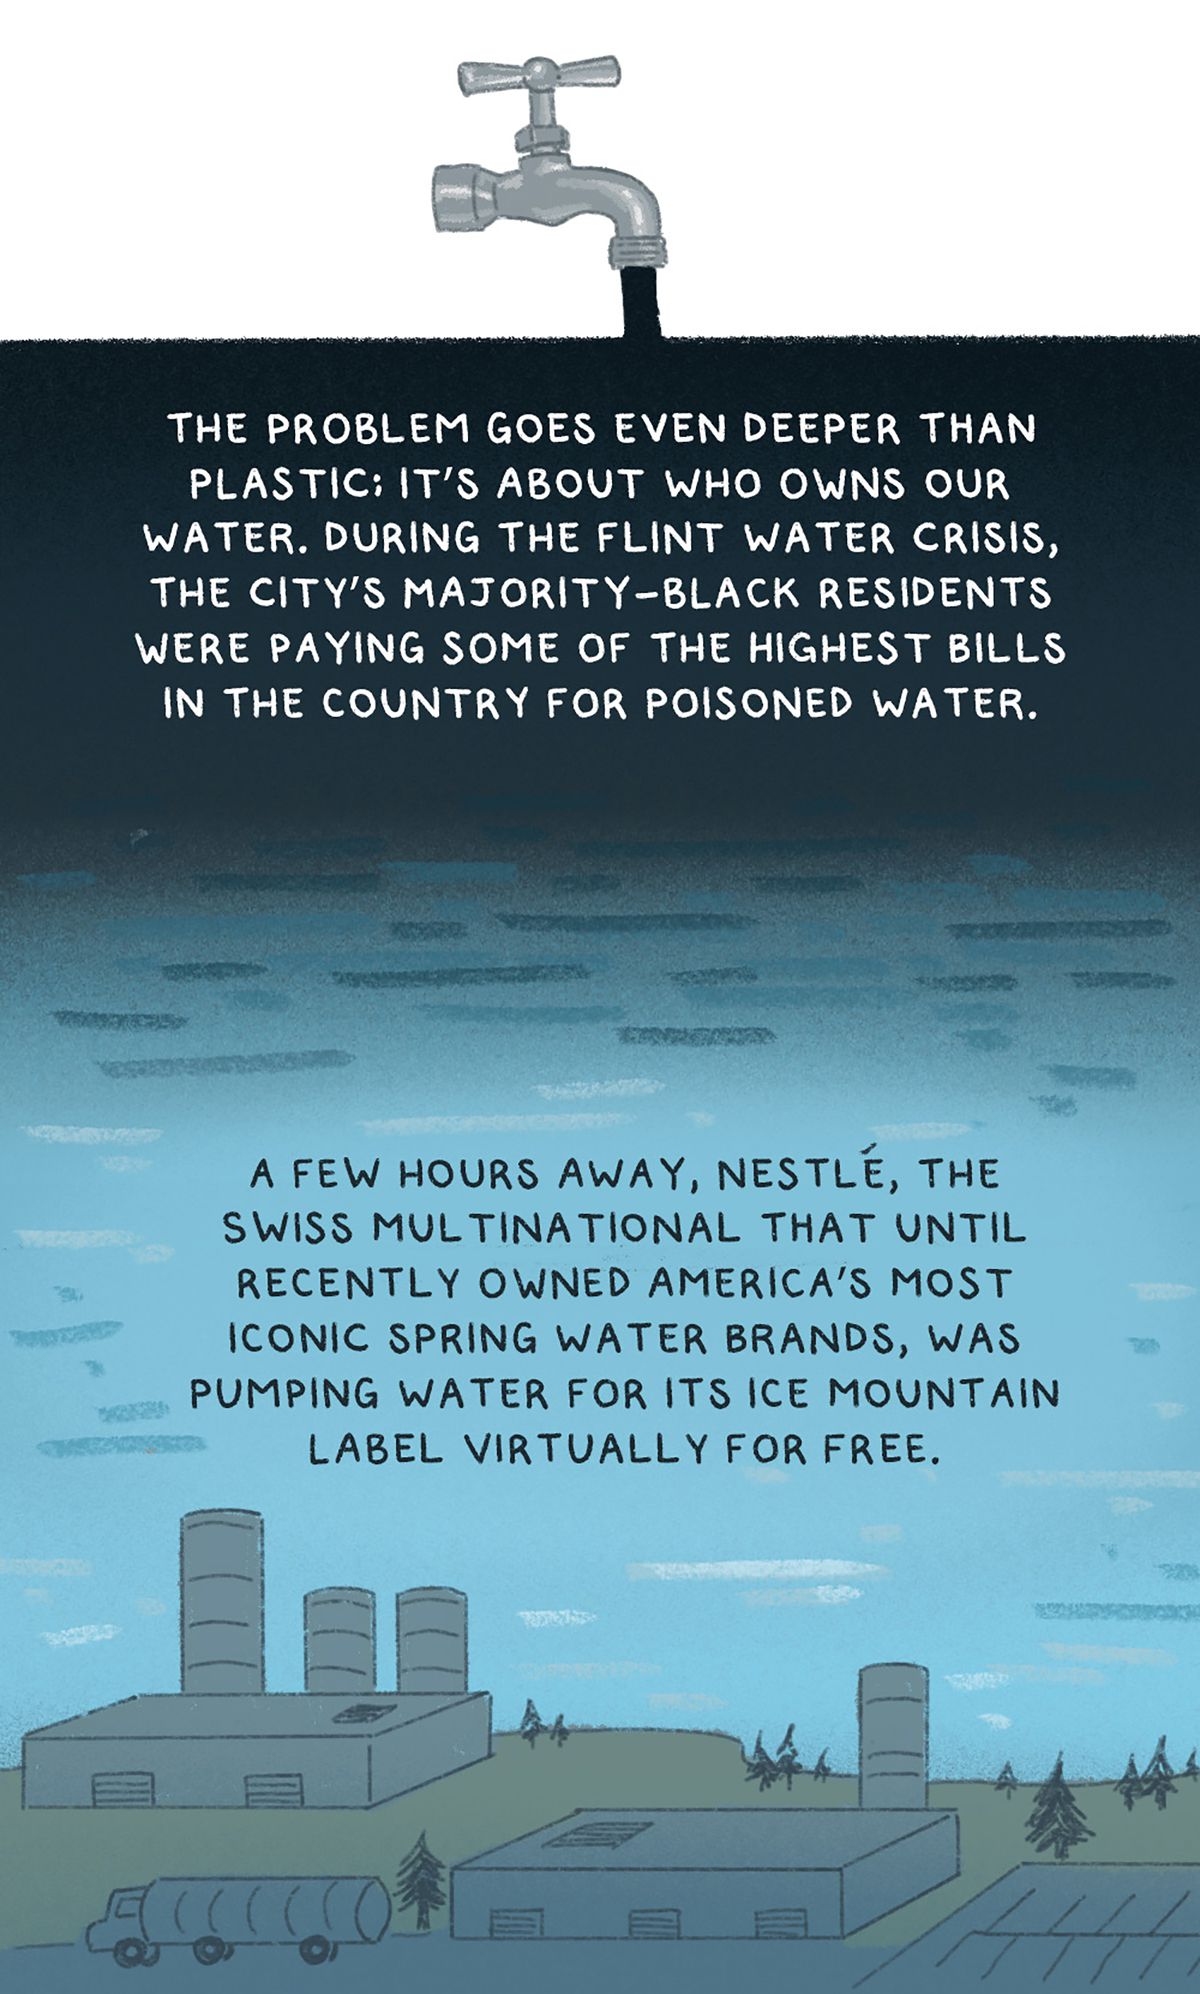 “The problem goes even deeper than plastic; it’s about who owns our water. During the Flint water crisis, the city’s majority-Black residents were paying some of the highest bills in the country for poisoned water.&nbsp;A few hours away, Nestlé, the Swiss multinational that until recently owned America’s most iconic spring water brands, was pumping water for its Ice Mountain label virtually for free.” Drawing of a faucet pouring black water over Detroit.